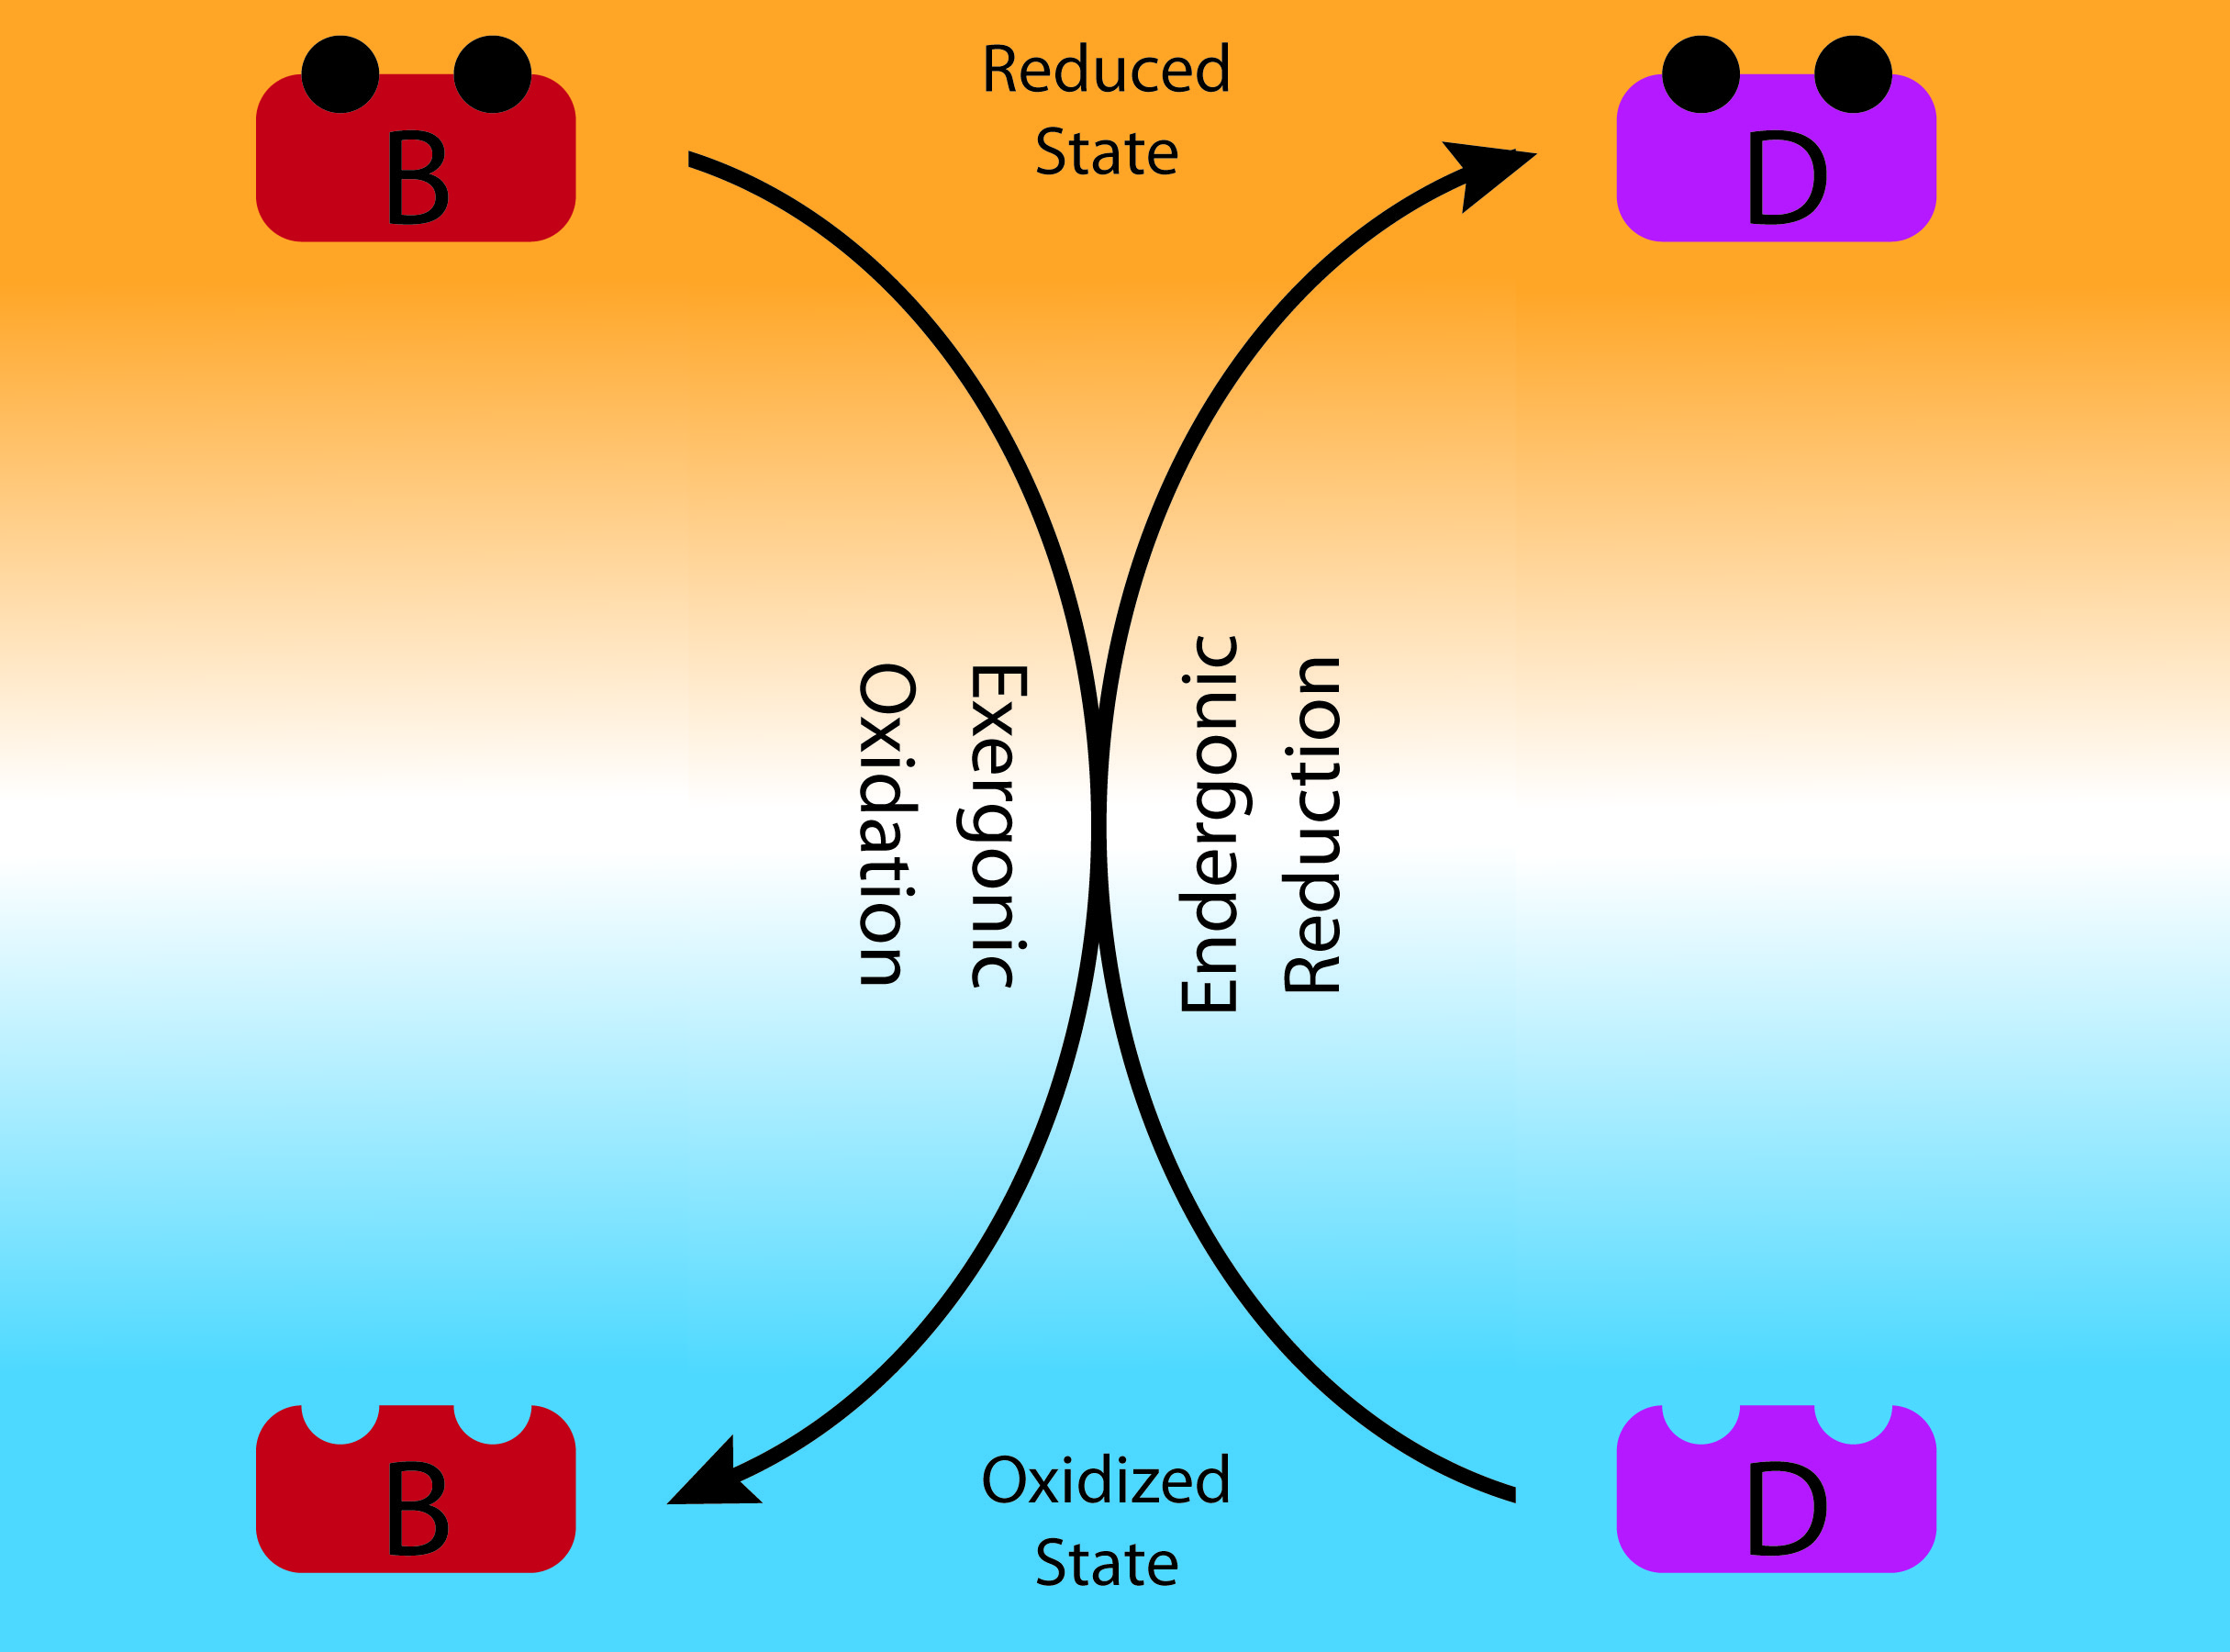 Oxidation Reduction coupling